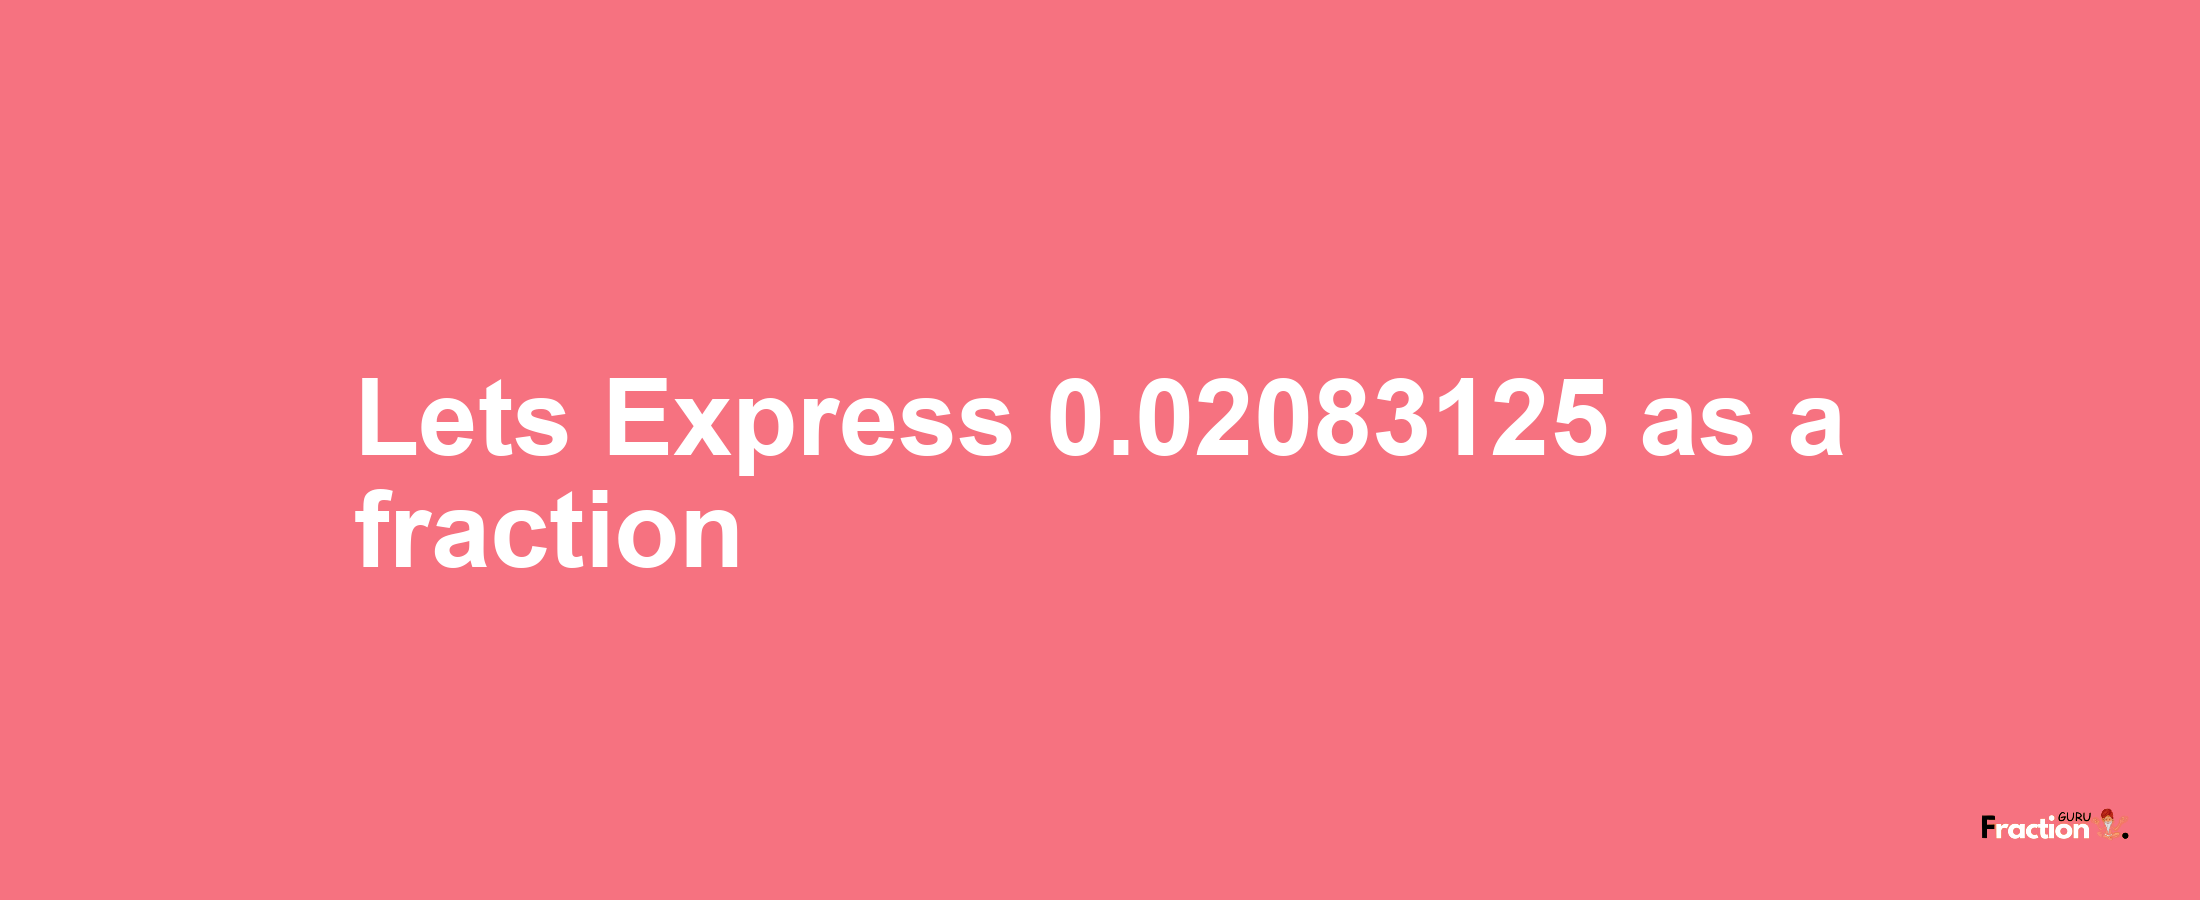 Lets Express 0.02083125 as afraction